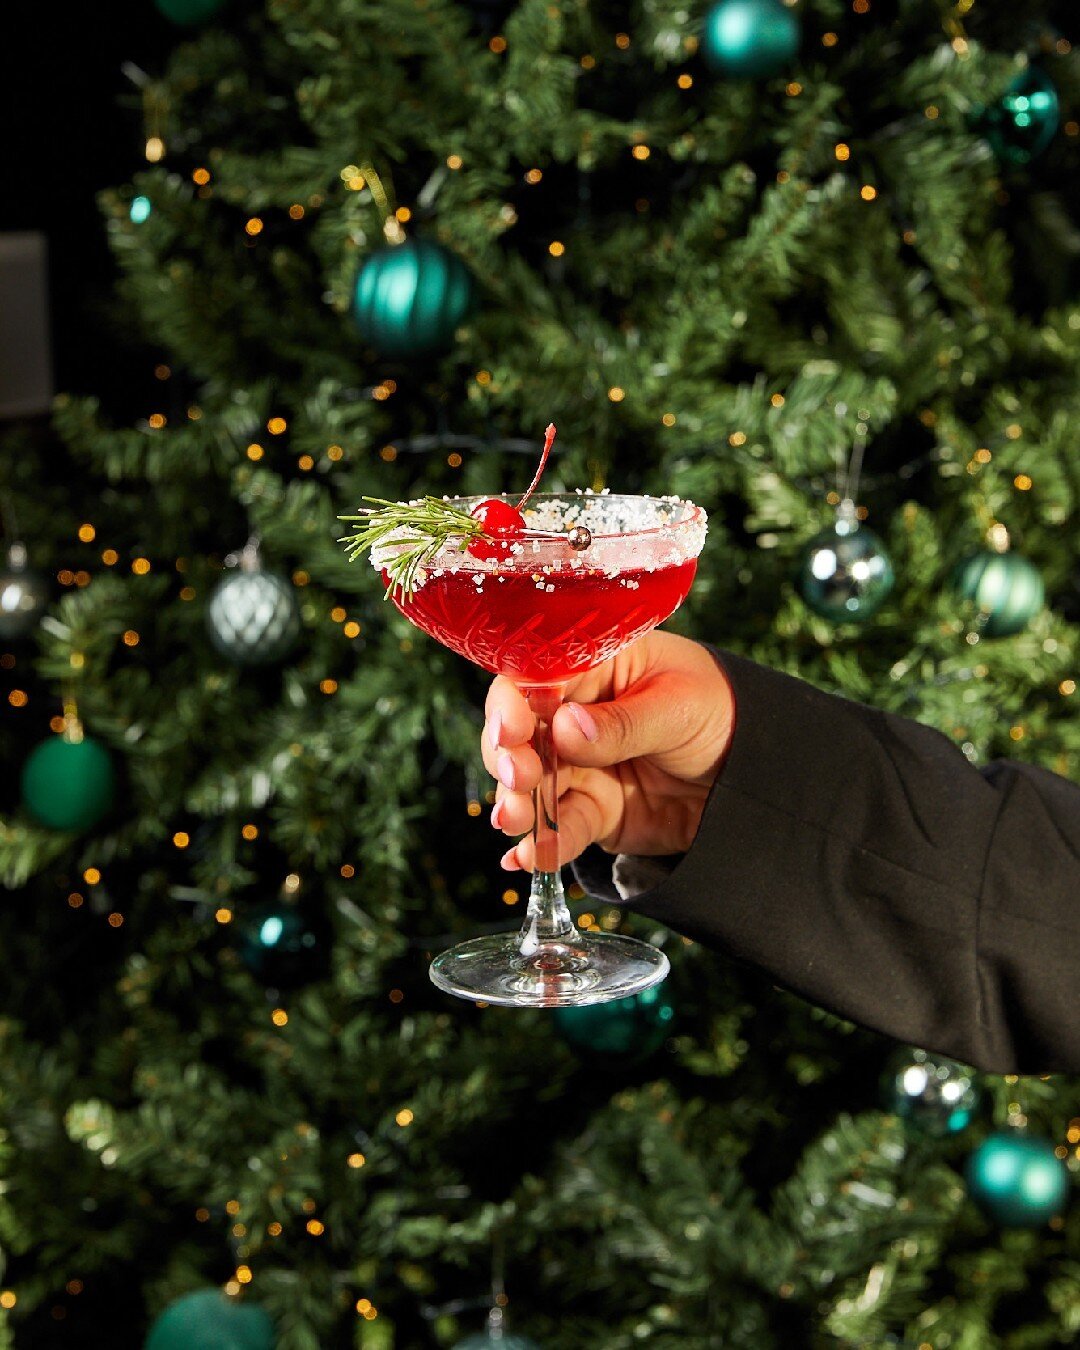 It's the most wonderful time of year and our friends down at @brooklyncocktailbar are supplying all of the festive vibes with their 12 Cocktails of Christmas! Head down to try them throughout December until Christmas Eve! 🎄✨

The Grinch is a must-tr